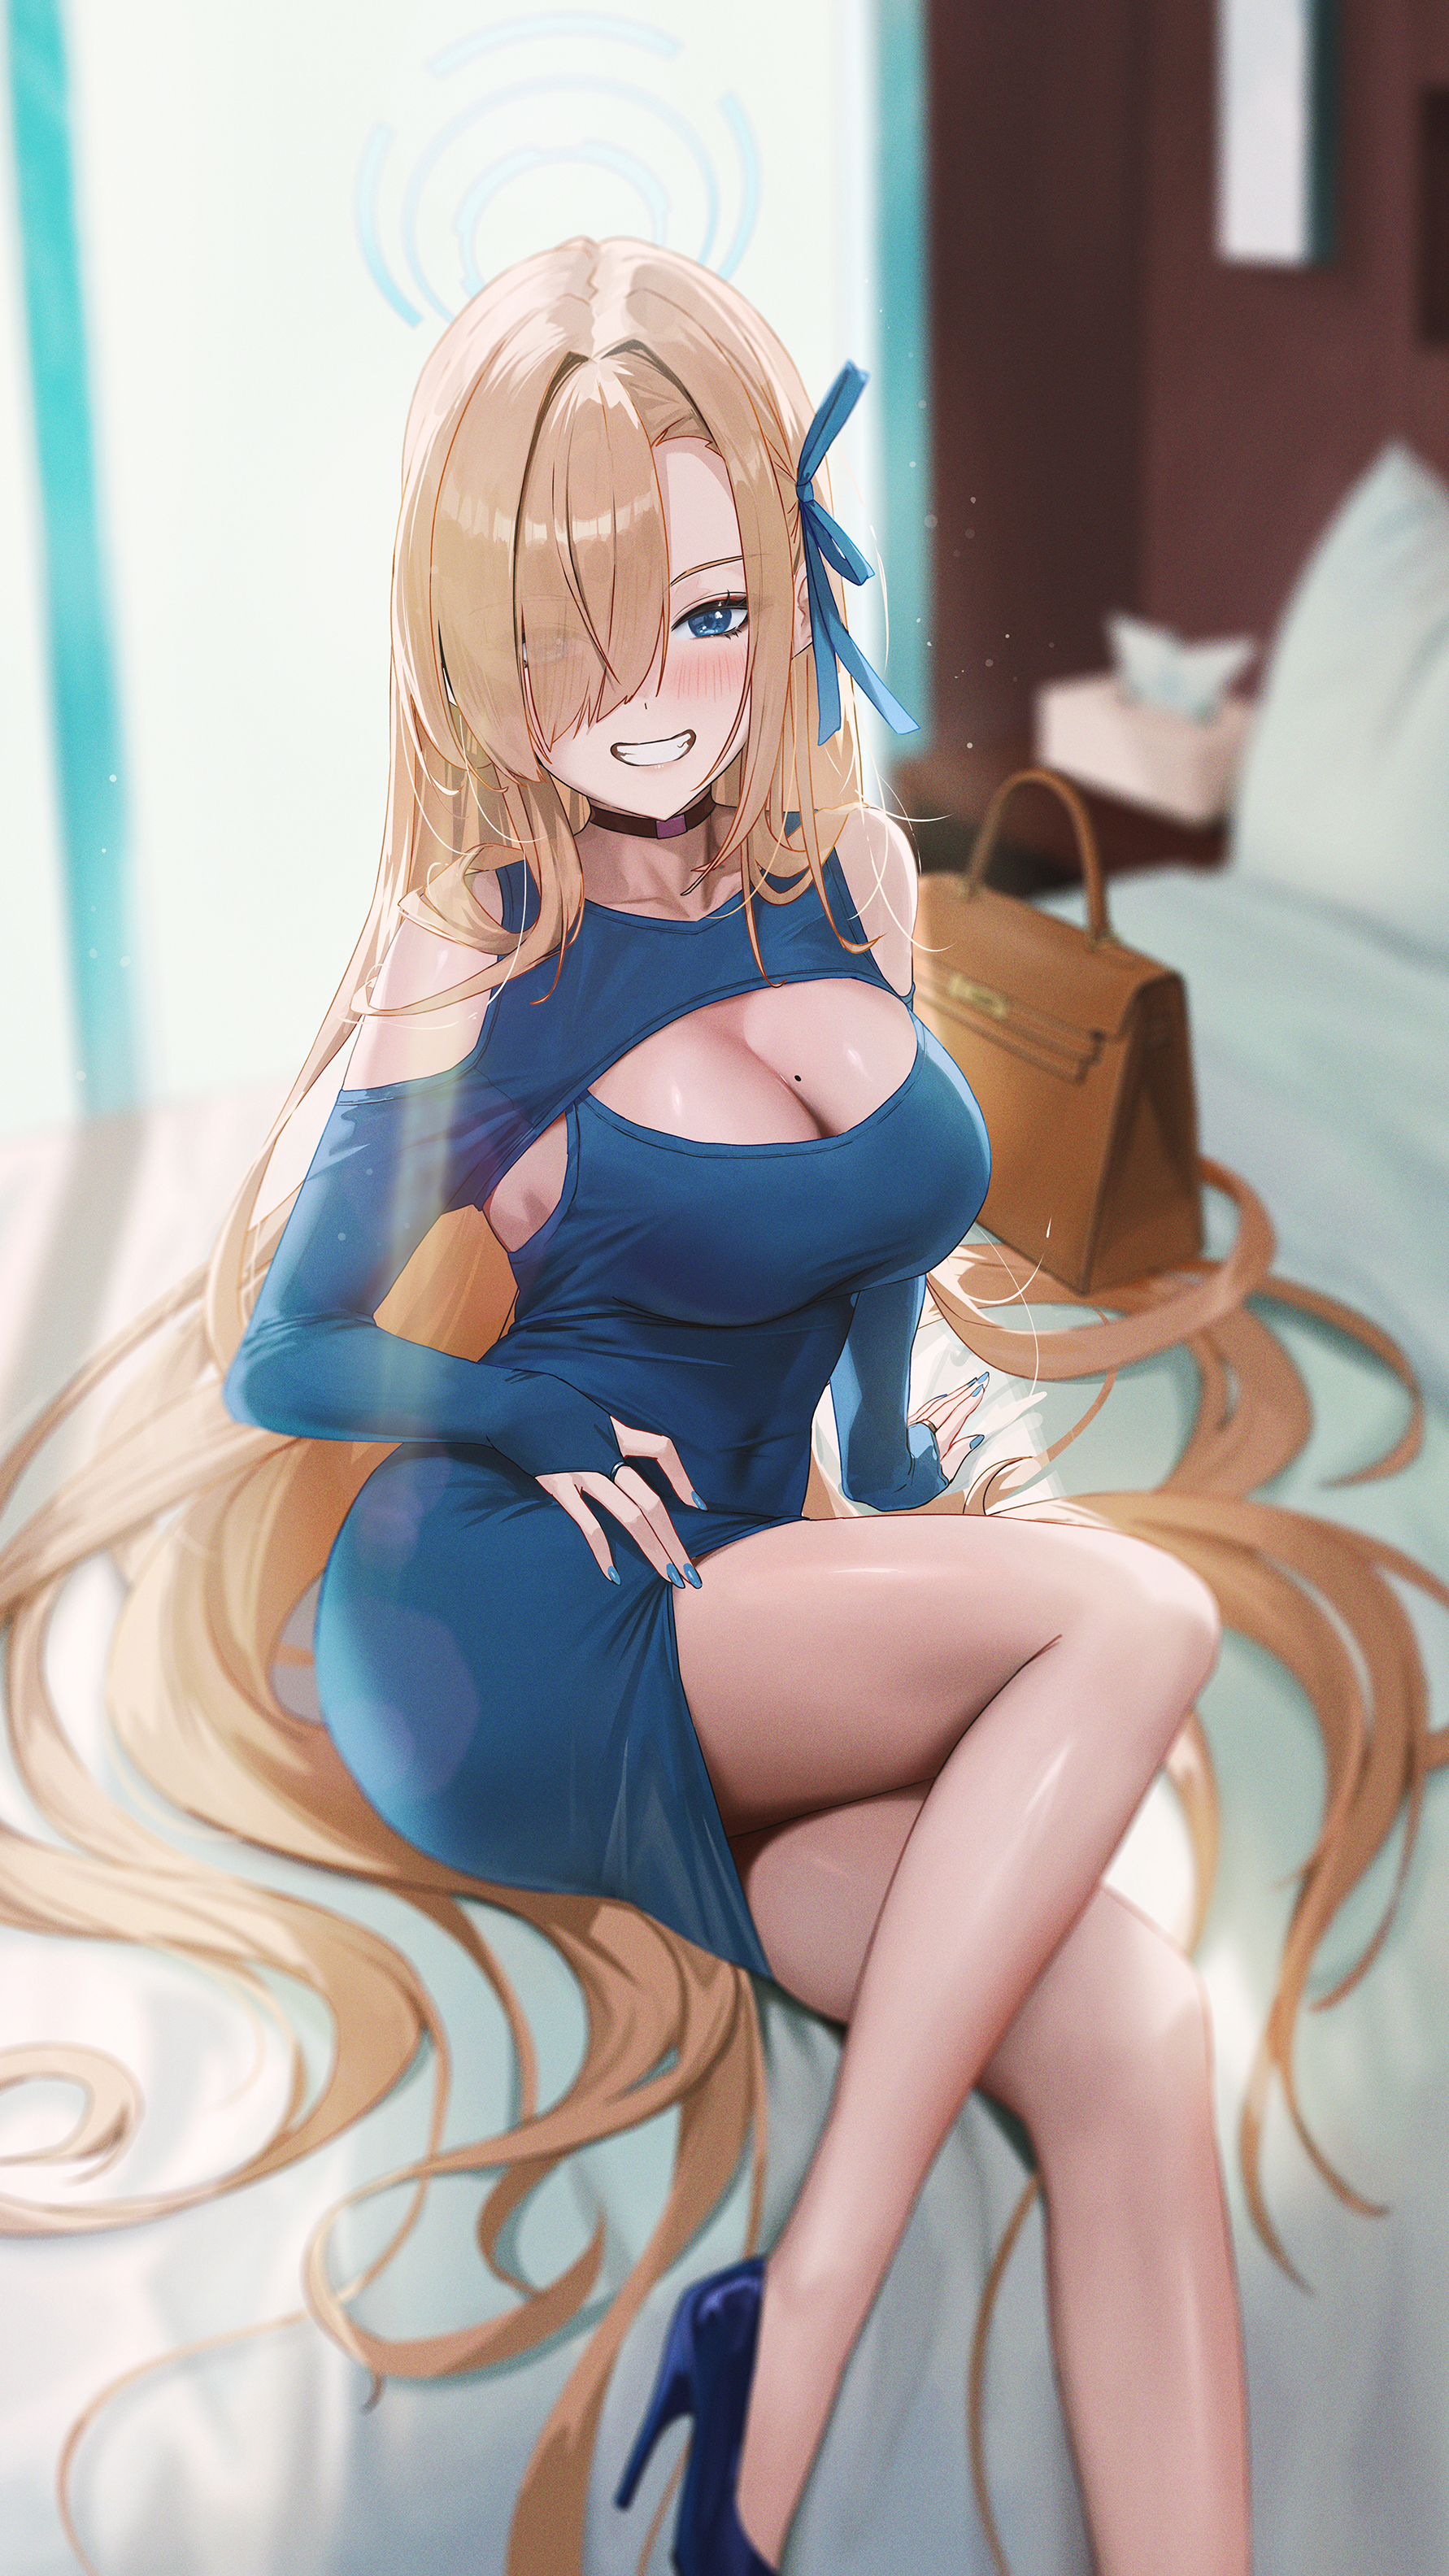 Anime 1782x3168 anime anime girls Blue Archive long hair Asuna Ichinose choker moles mole on breast dress blue dress painted nails blue nails blonde blue eyes blue heels heels smiling blushing cleavage big boobs Fieryonion portrait display bed hair over one eye hair spread out sitting bare shoulders purse indoors women indoors